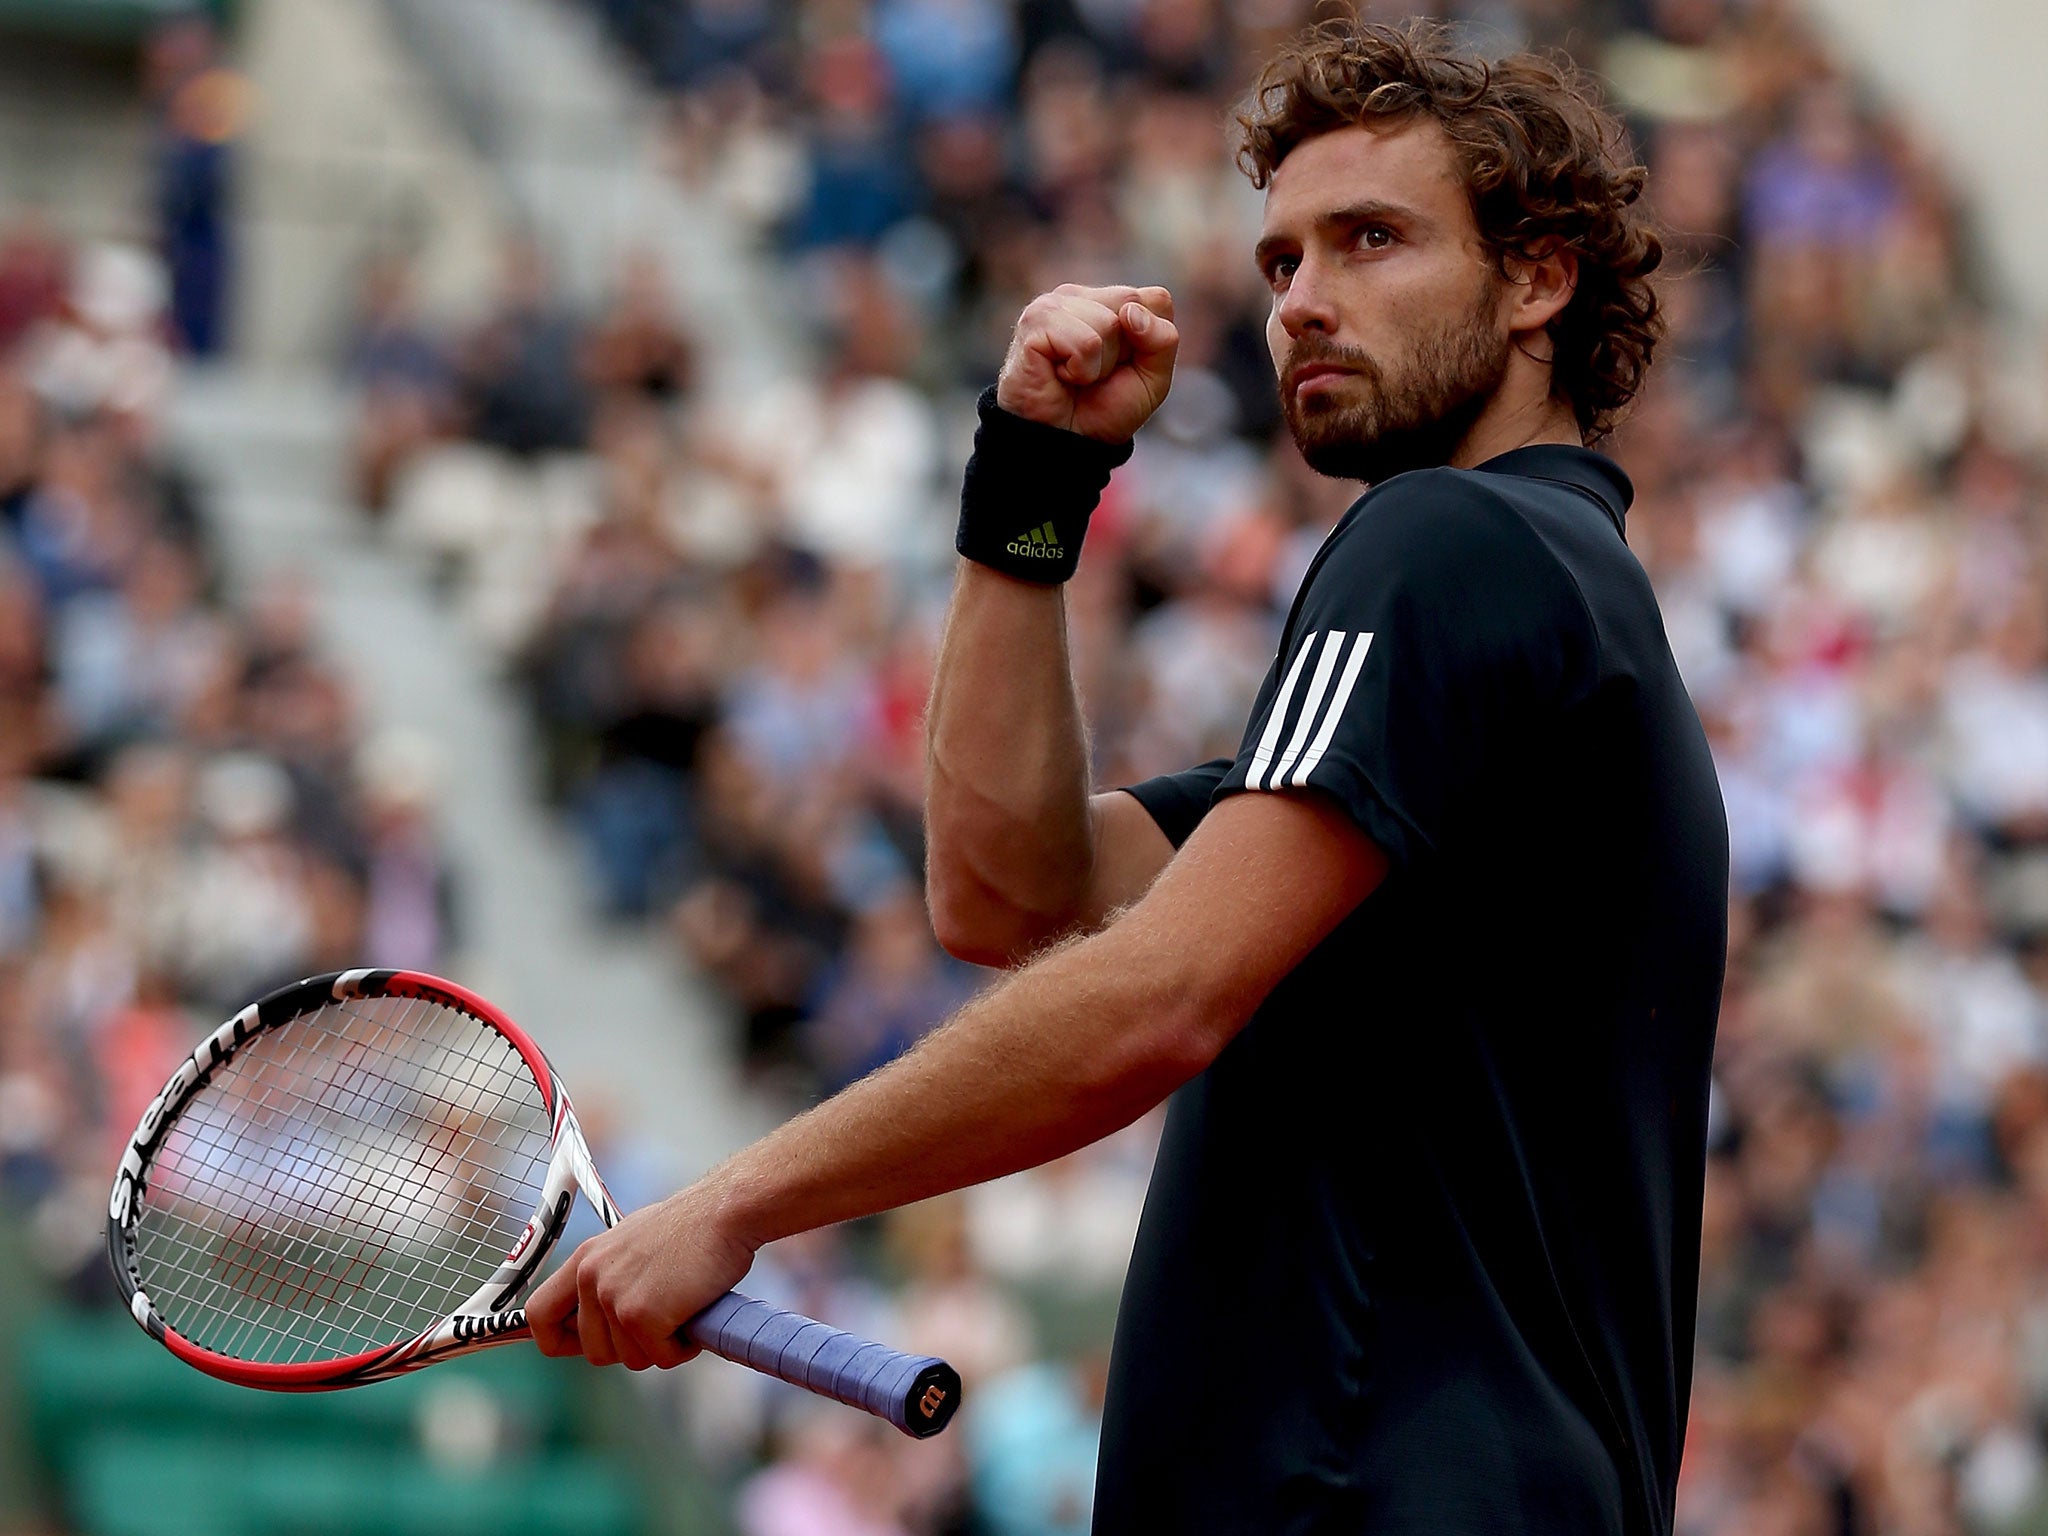 Ernests Gulbis of Latvia celebrates victory in his men's singles quarter-final match against Tomas Berdych of Czech Republic on day ten of the French Open